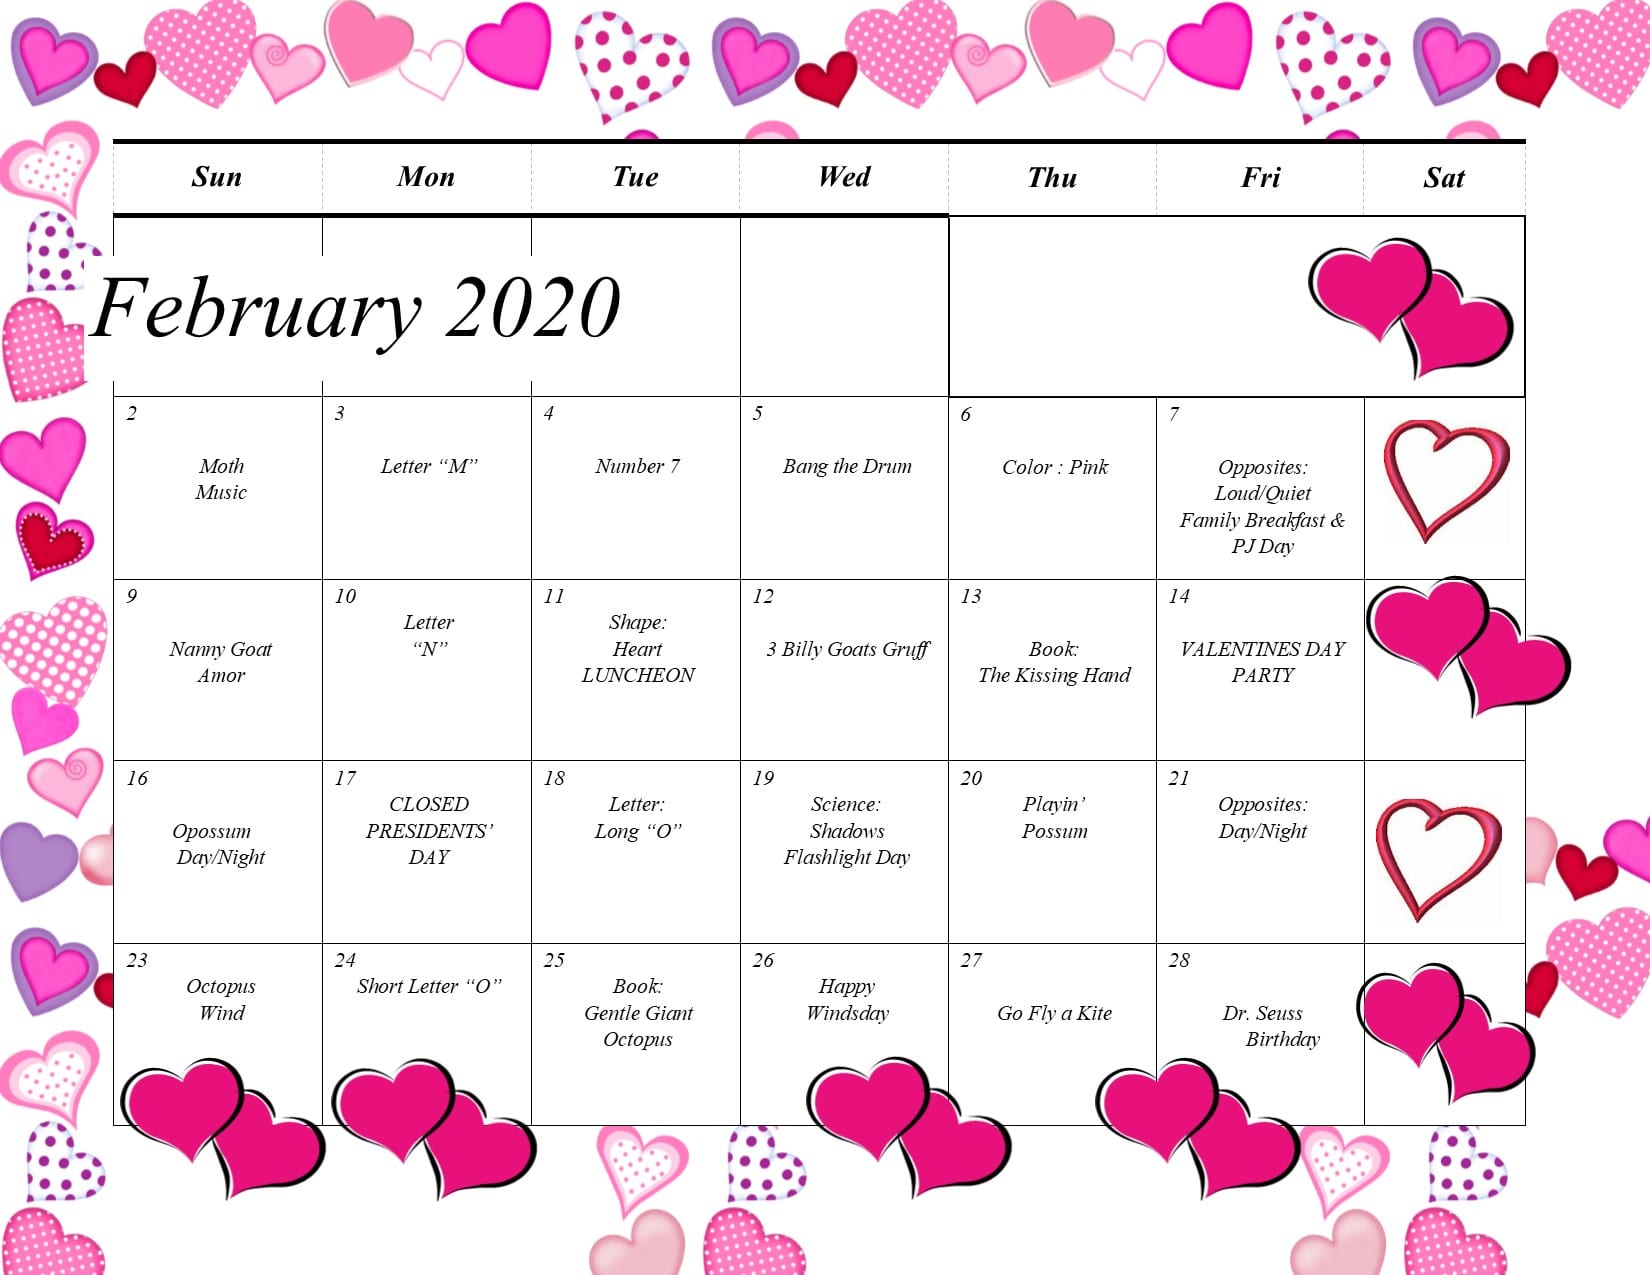 Sunshine House Top 10 Daycare February 2020 Newsletter